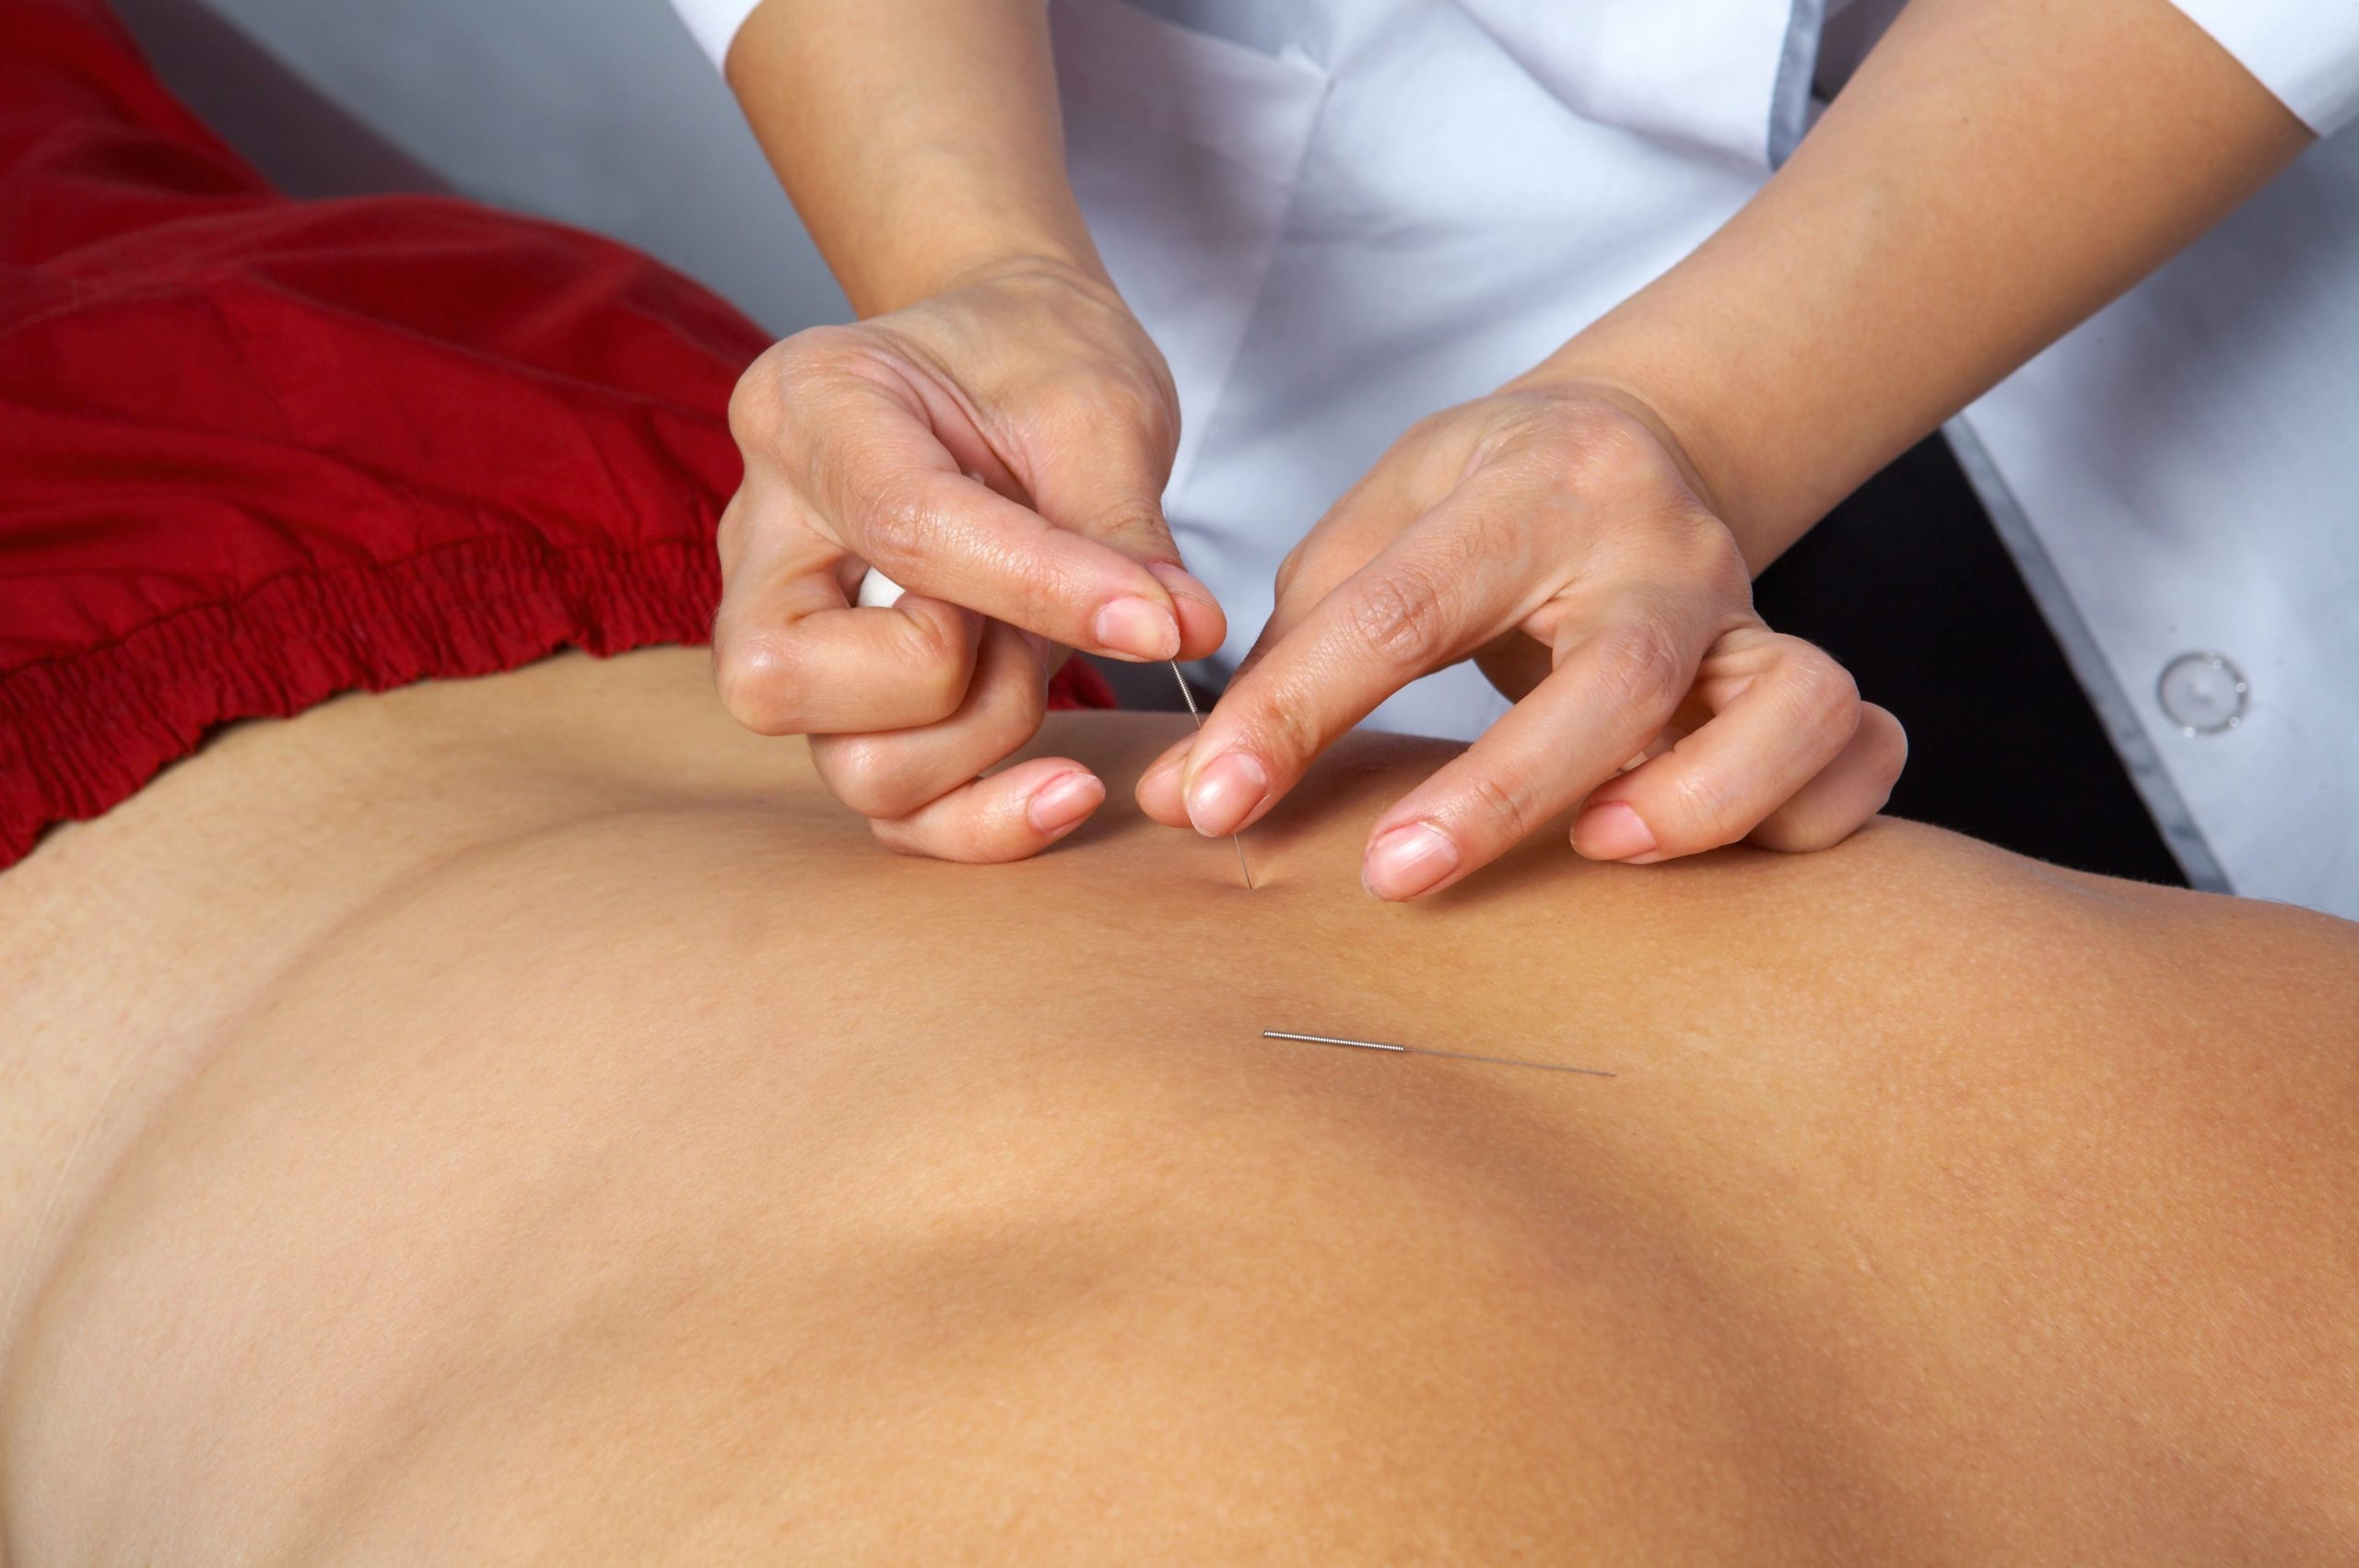 Dry Needling Vs. Acupuncture: Which Therapy Suits Your Needs?